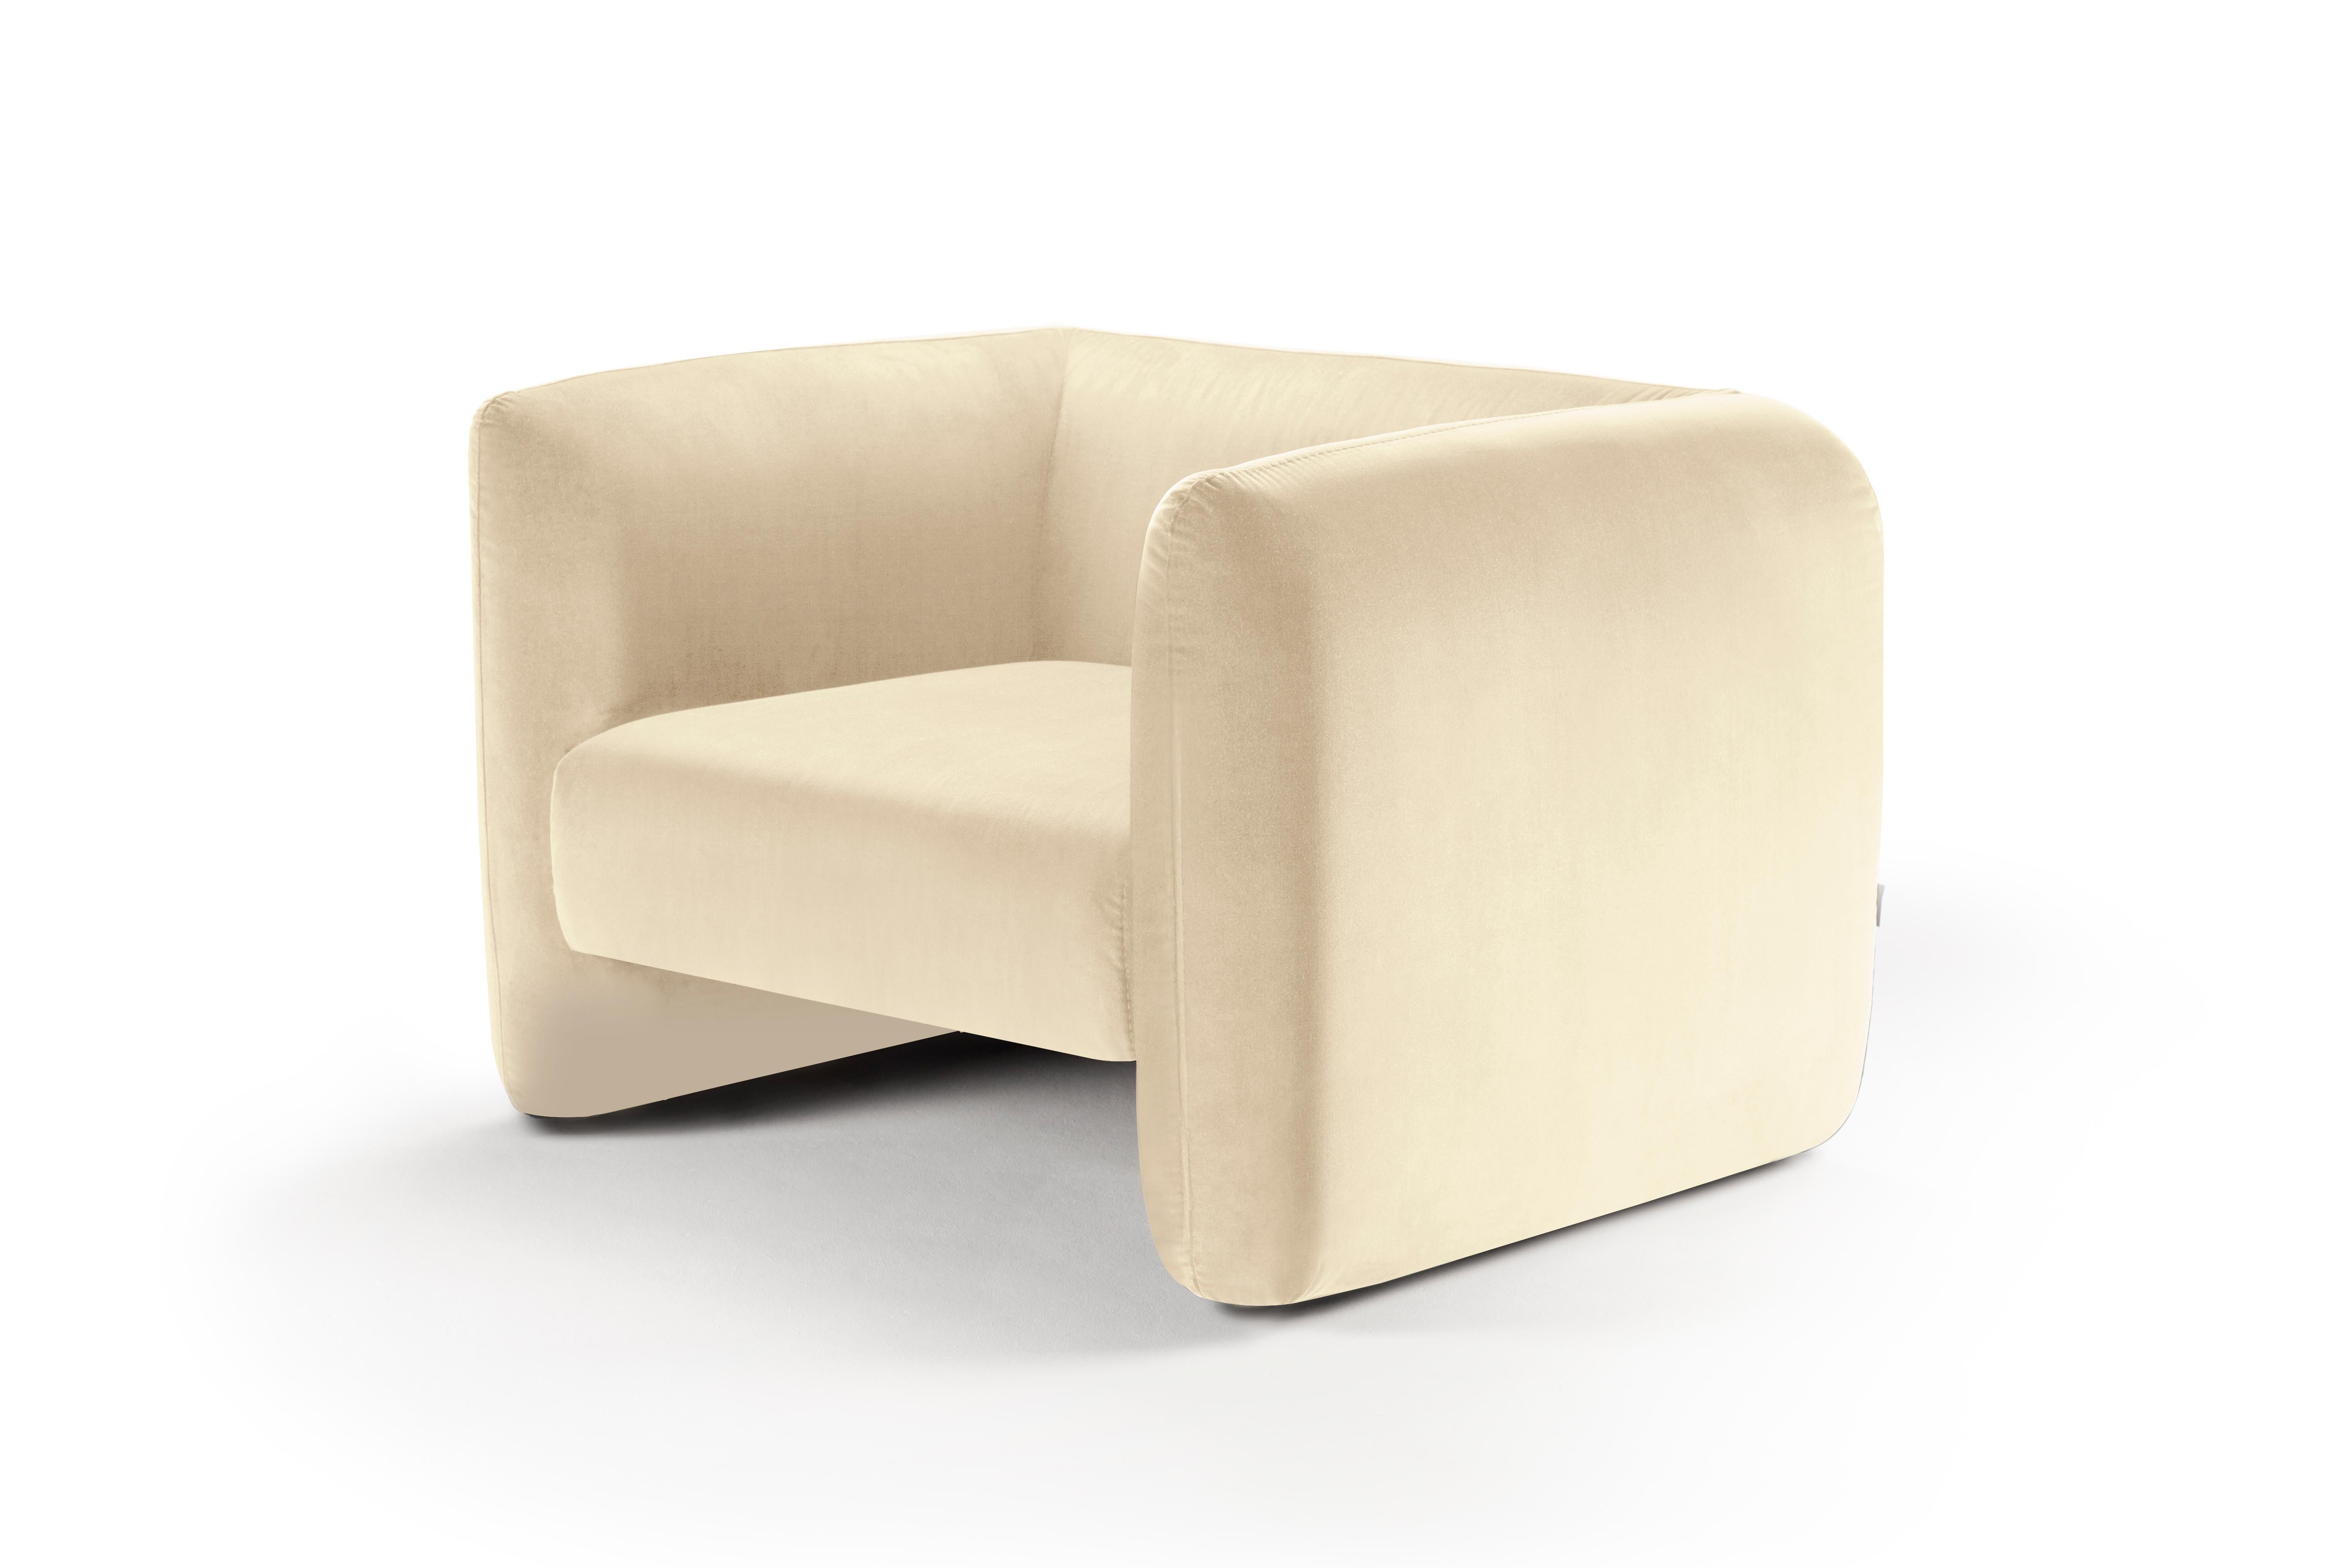 Portuguese Contemporary Modern Jacob Armchair in Beige Velvet Fabric by Collector Studio For Sale